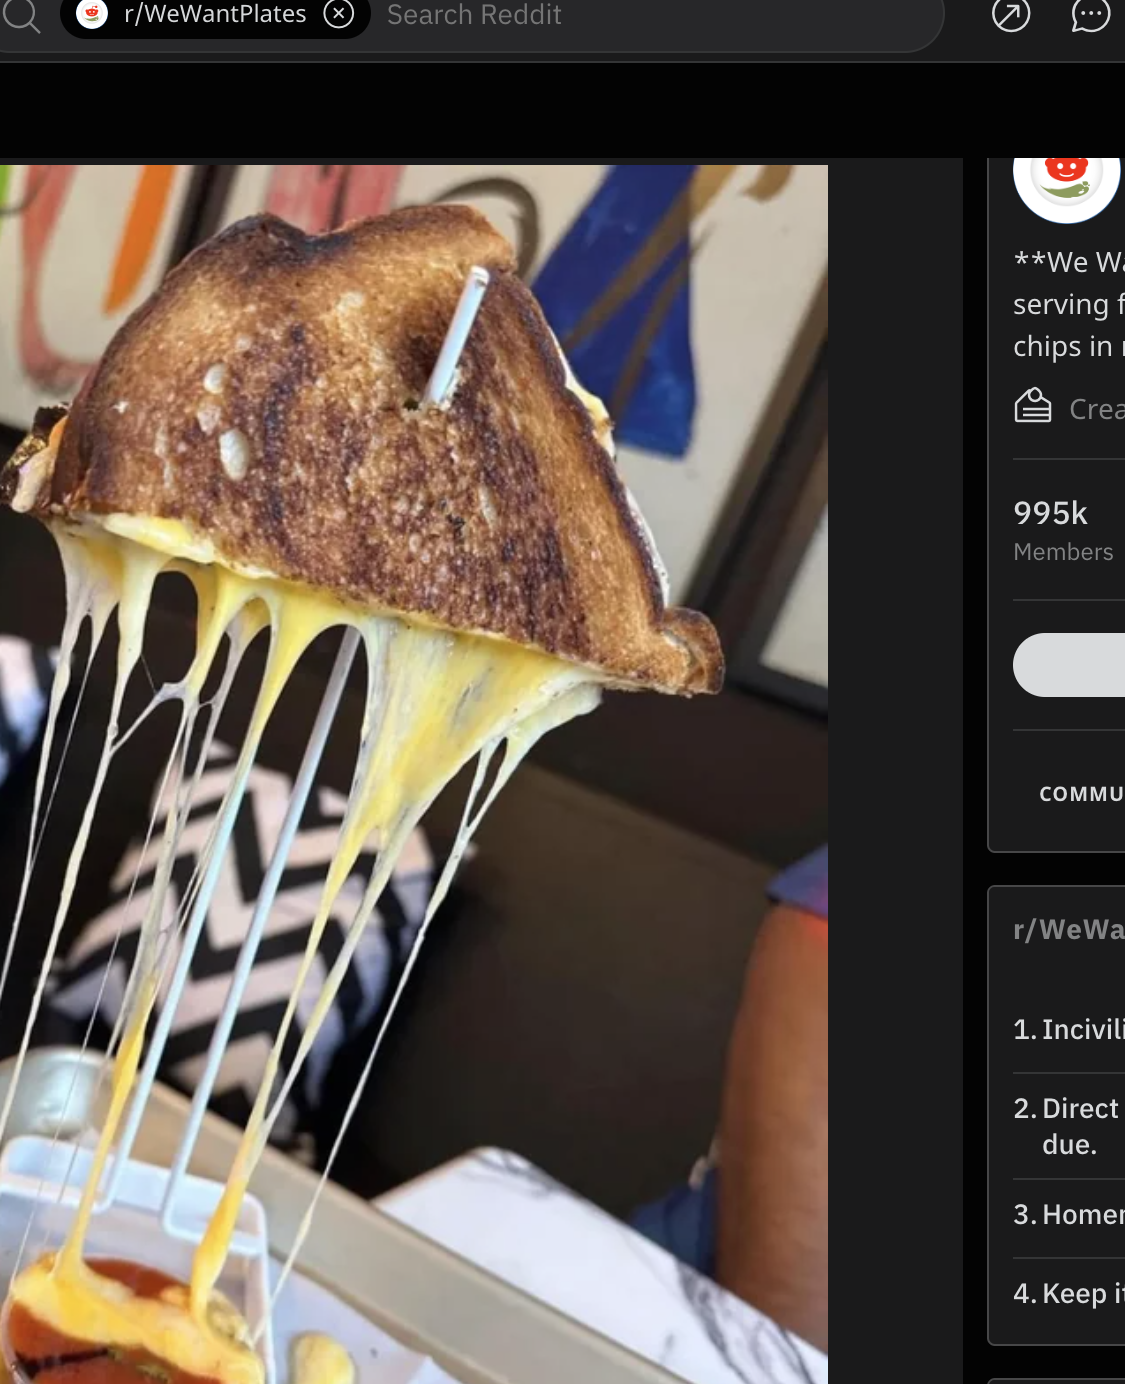 A grilled cheese is impaled